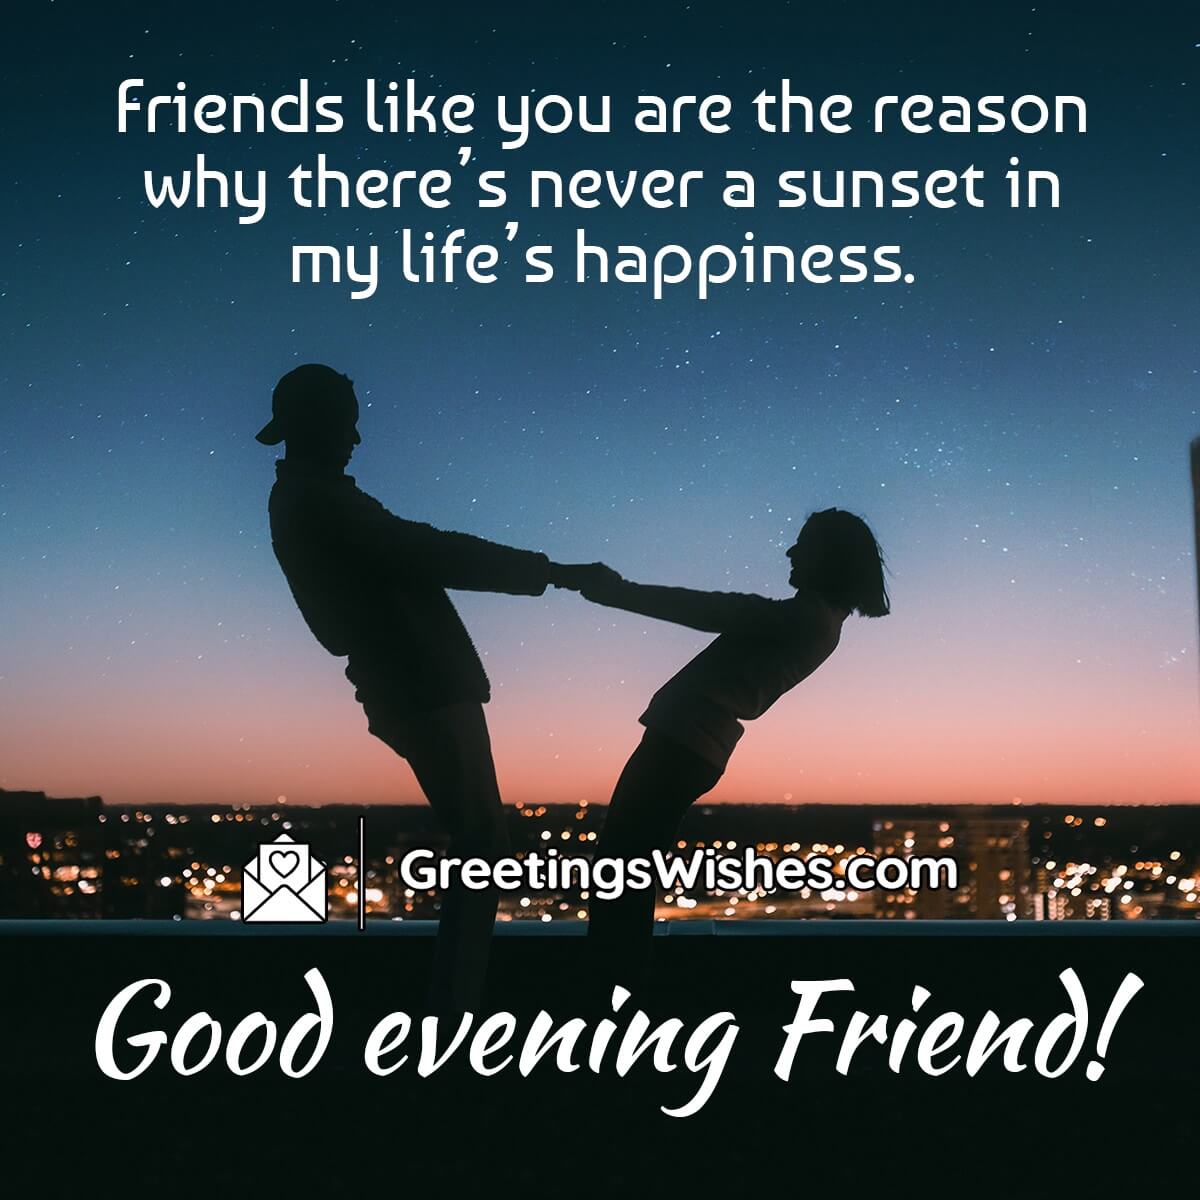 Good Evening Messages For Friends - Greetings Wishes